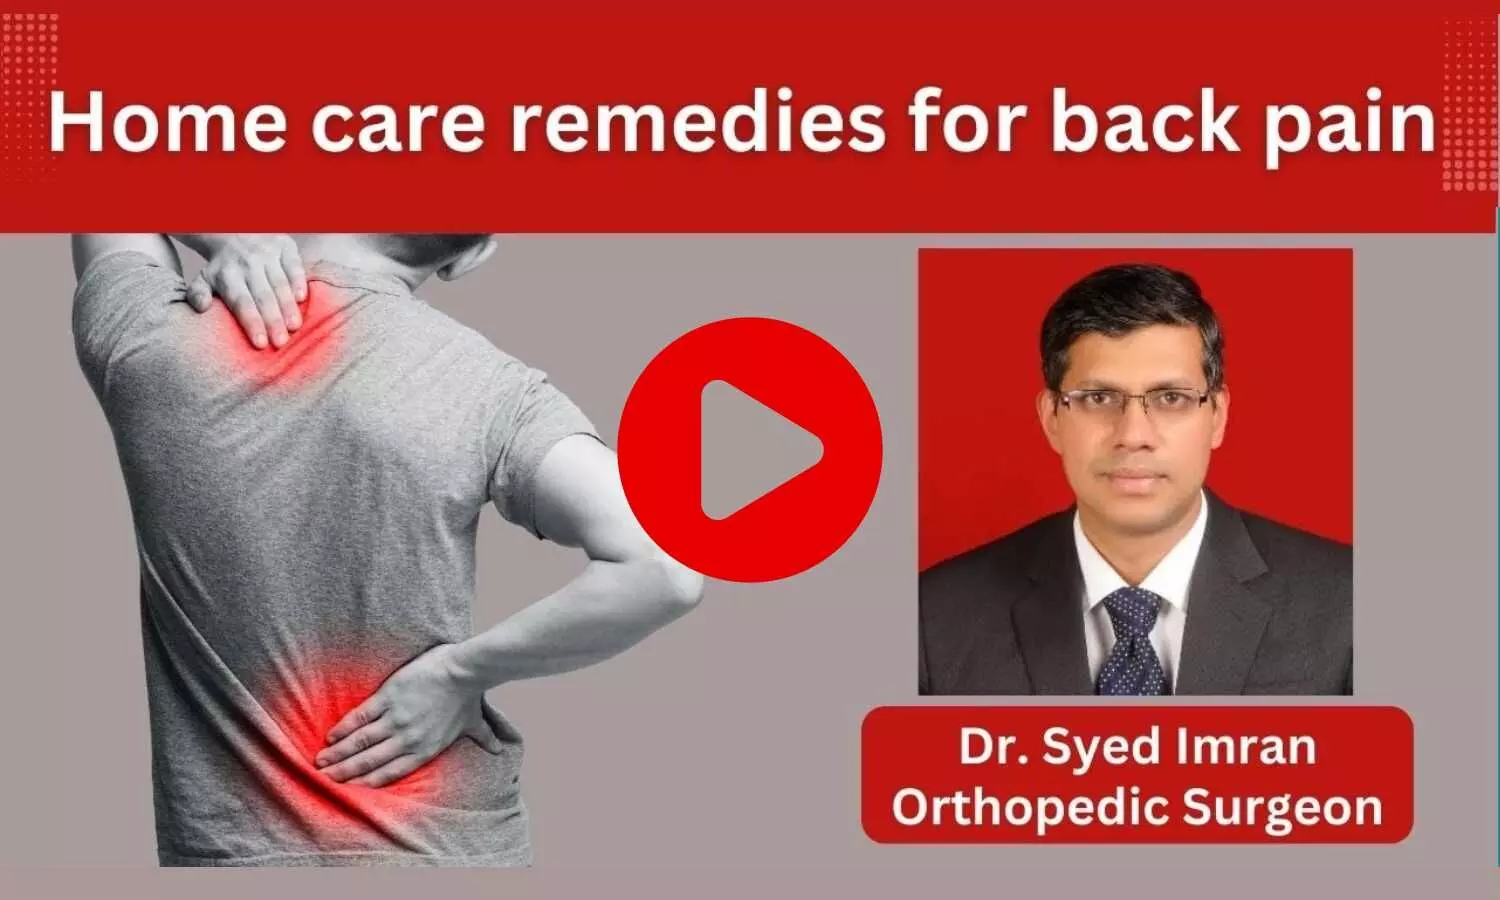 In-depth insights on Back pain- Ft. Dr. Syed Imran (Orthopedic Surgeon)